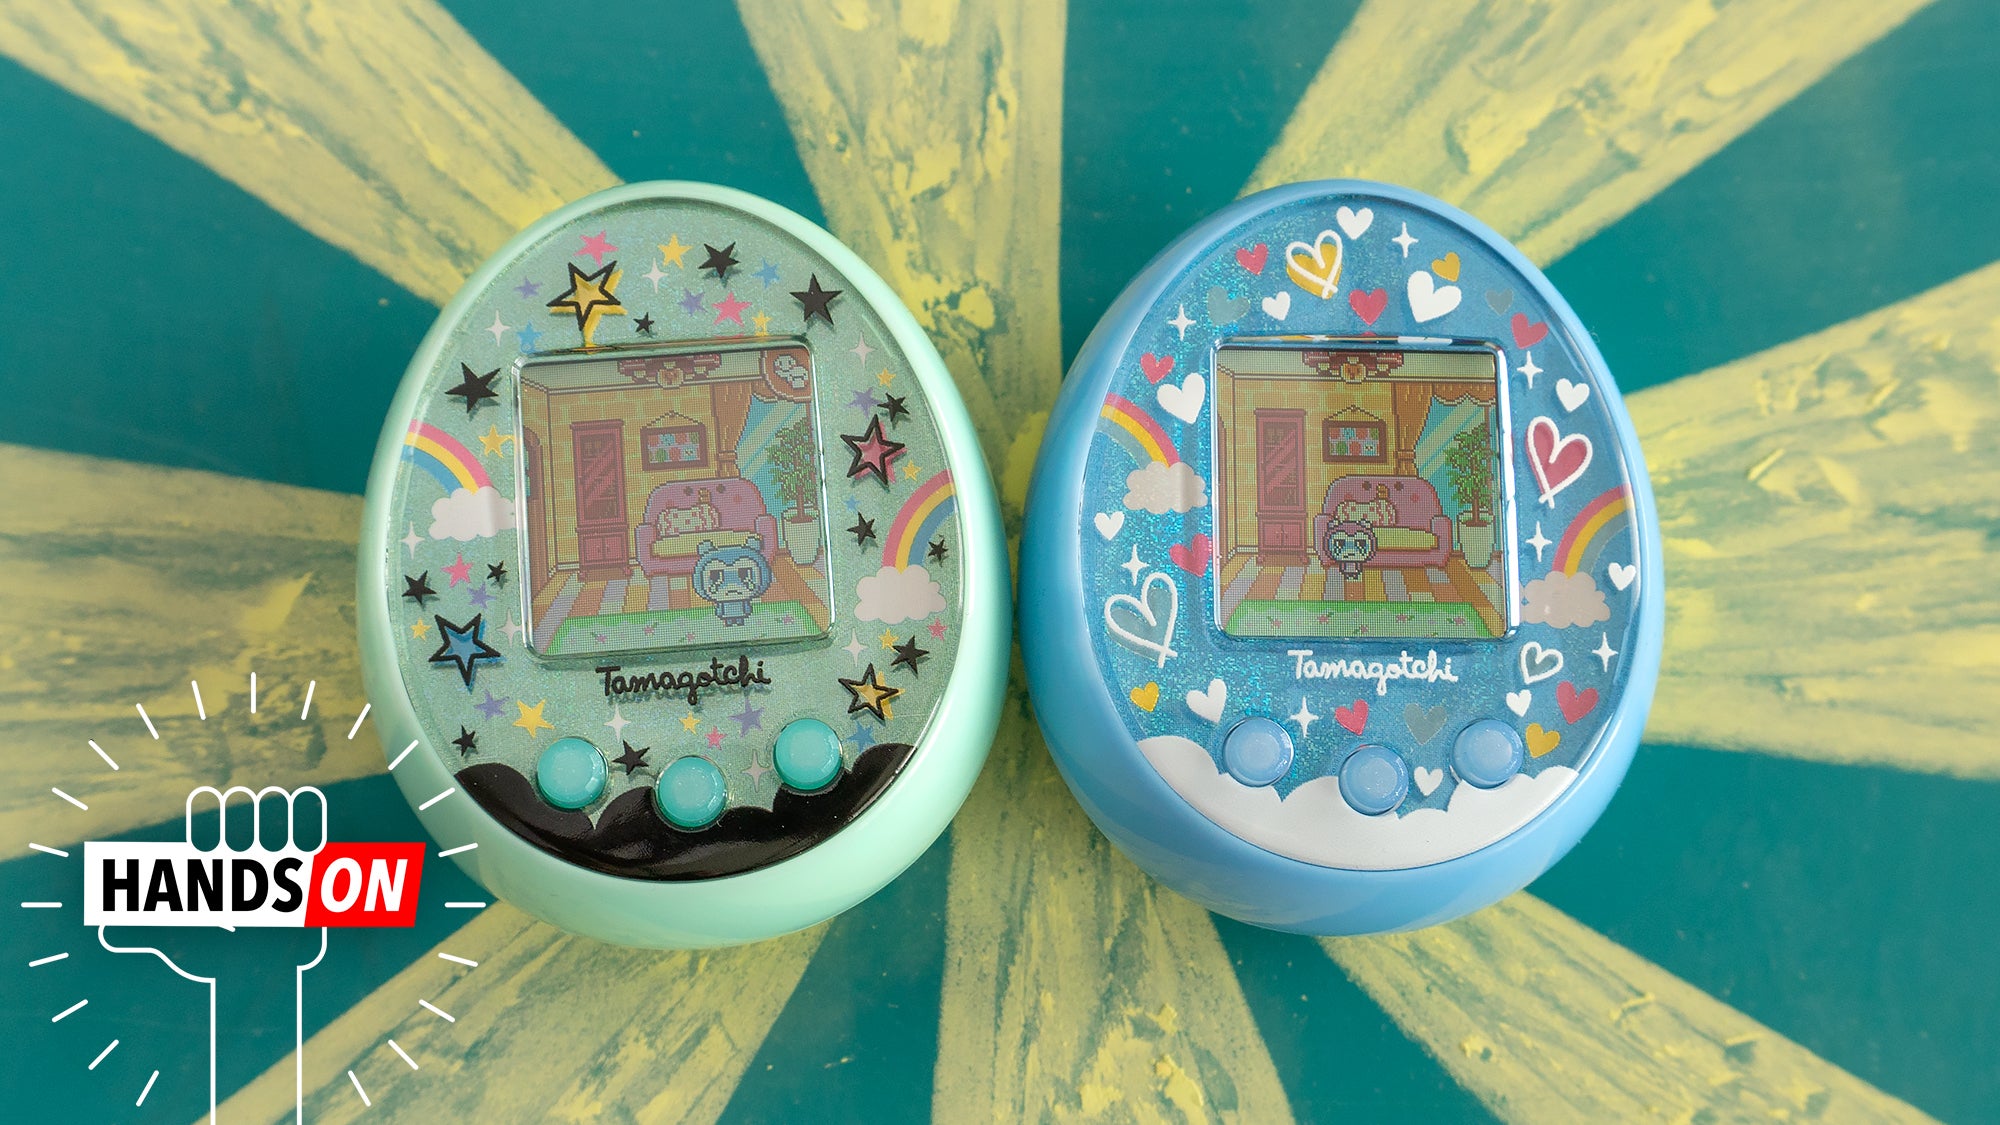 The New Tamagotchi Can Marry And Breed